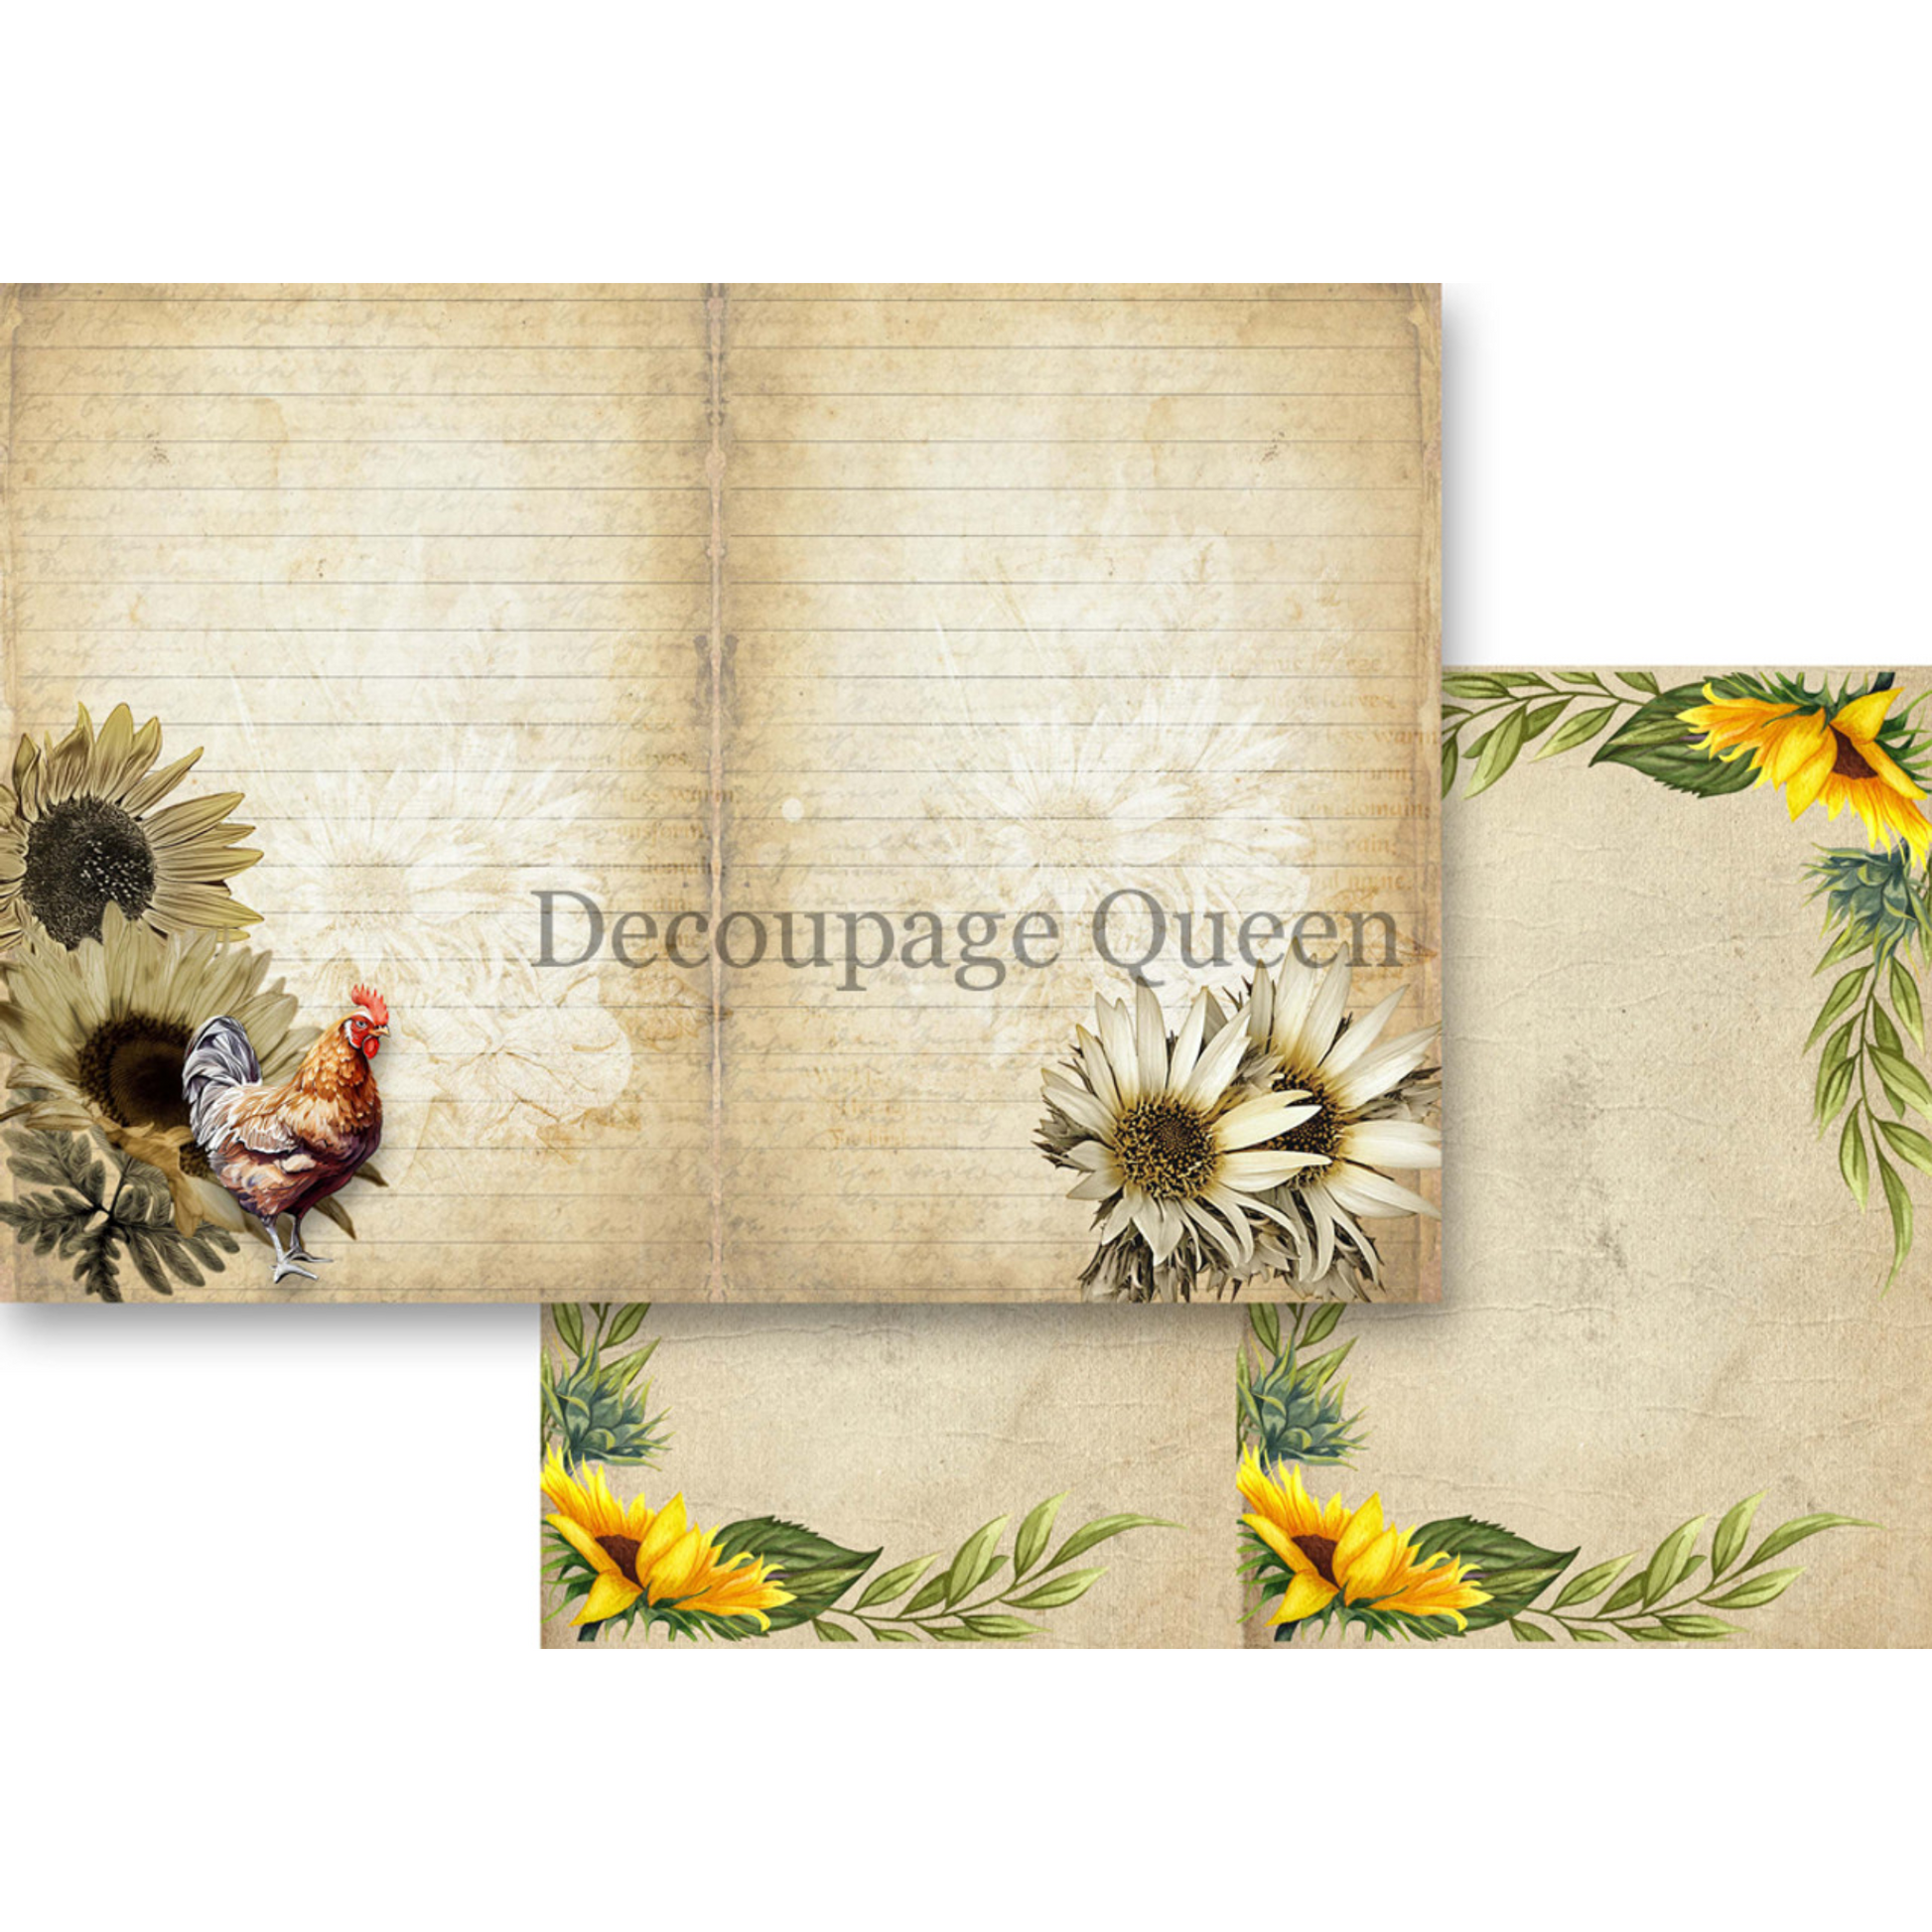 "Sunflower Ephemera Journal Kit" by Decoupage Queen.  Page 1. Available at Milton's Daughter.